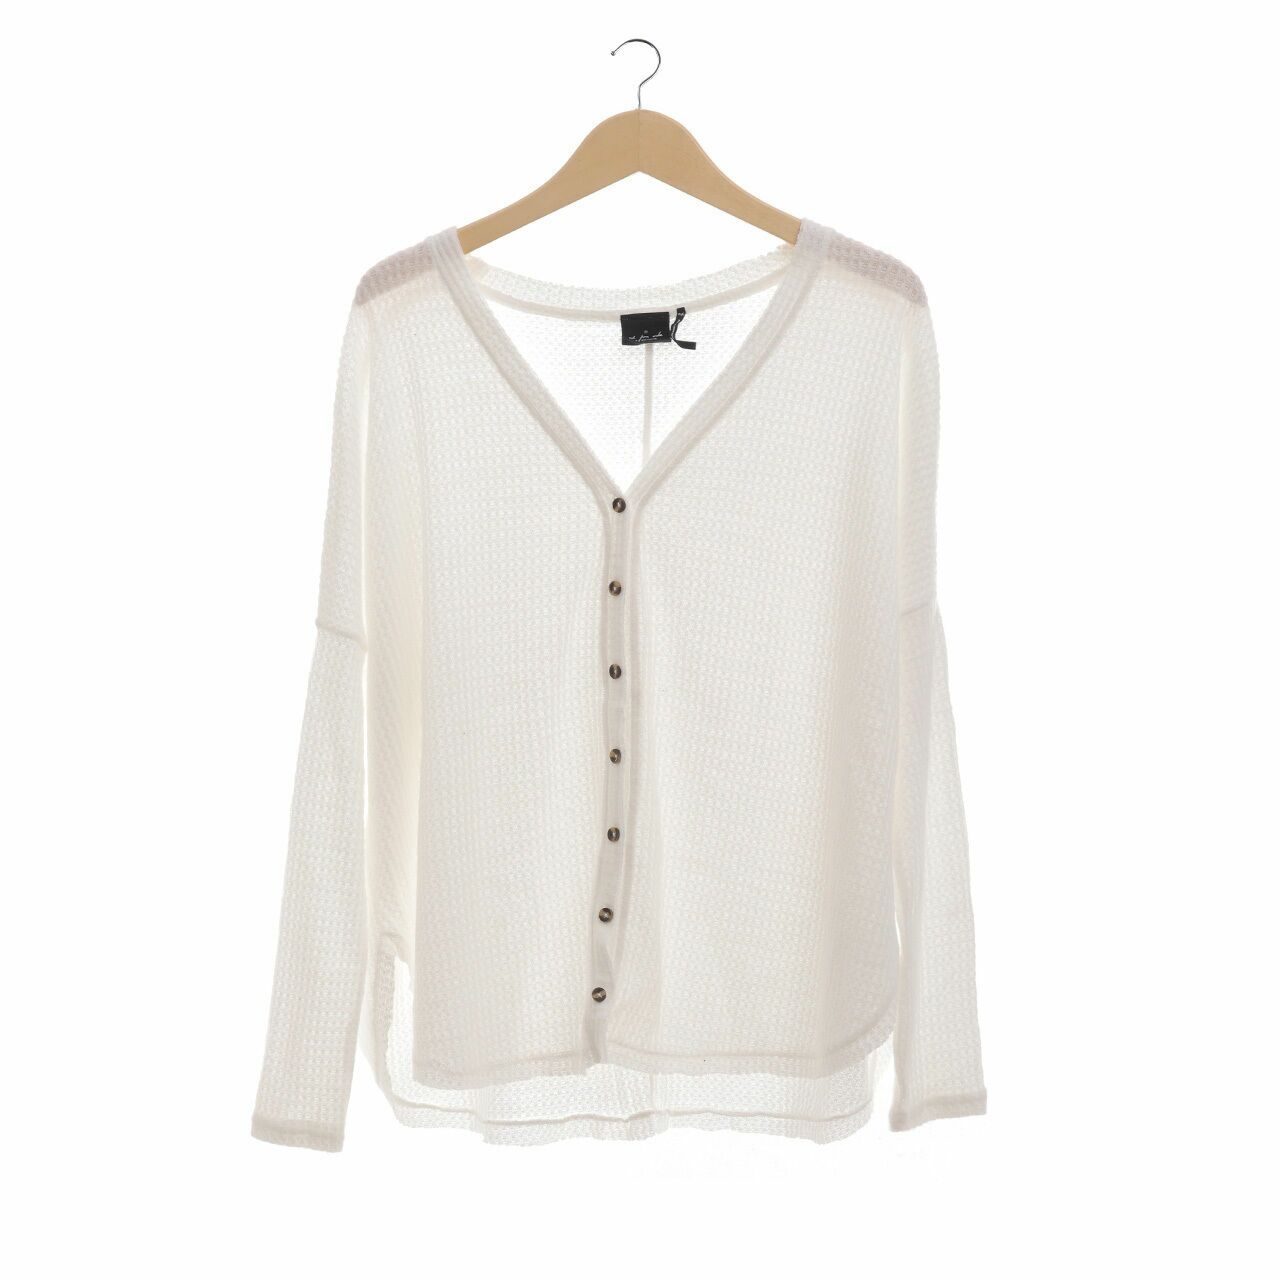 Urban Outfitters White Cardigan